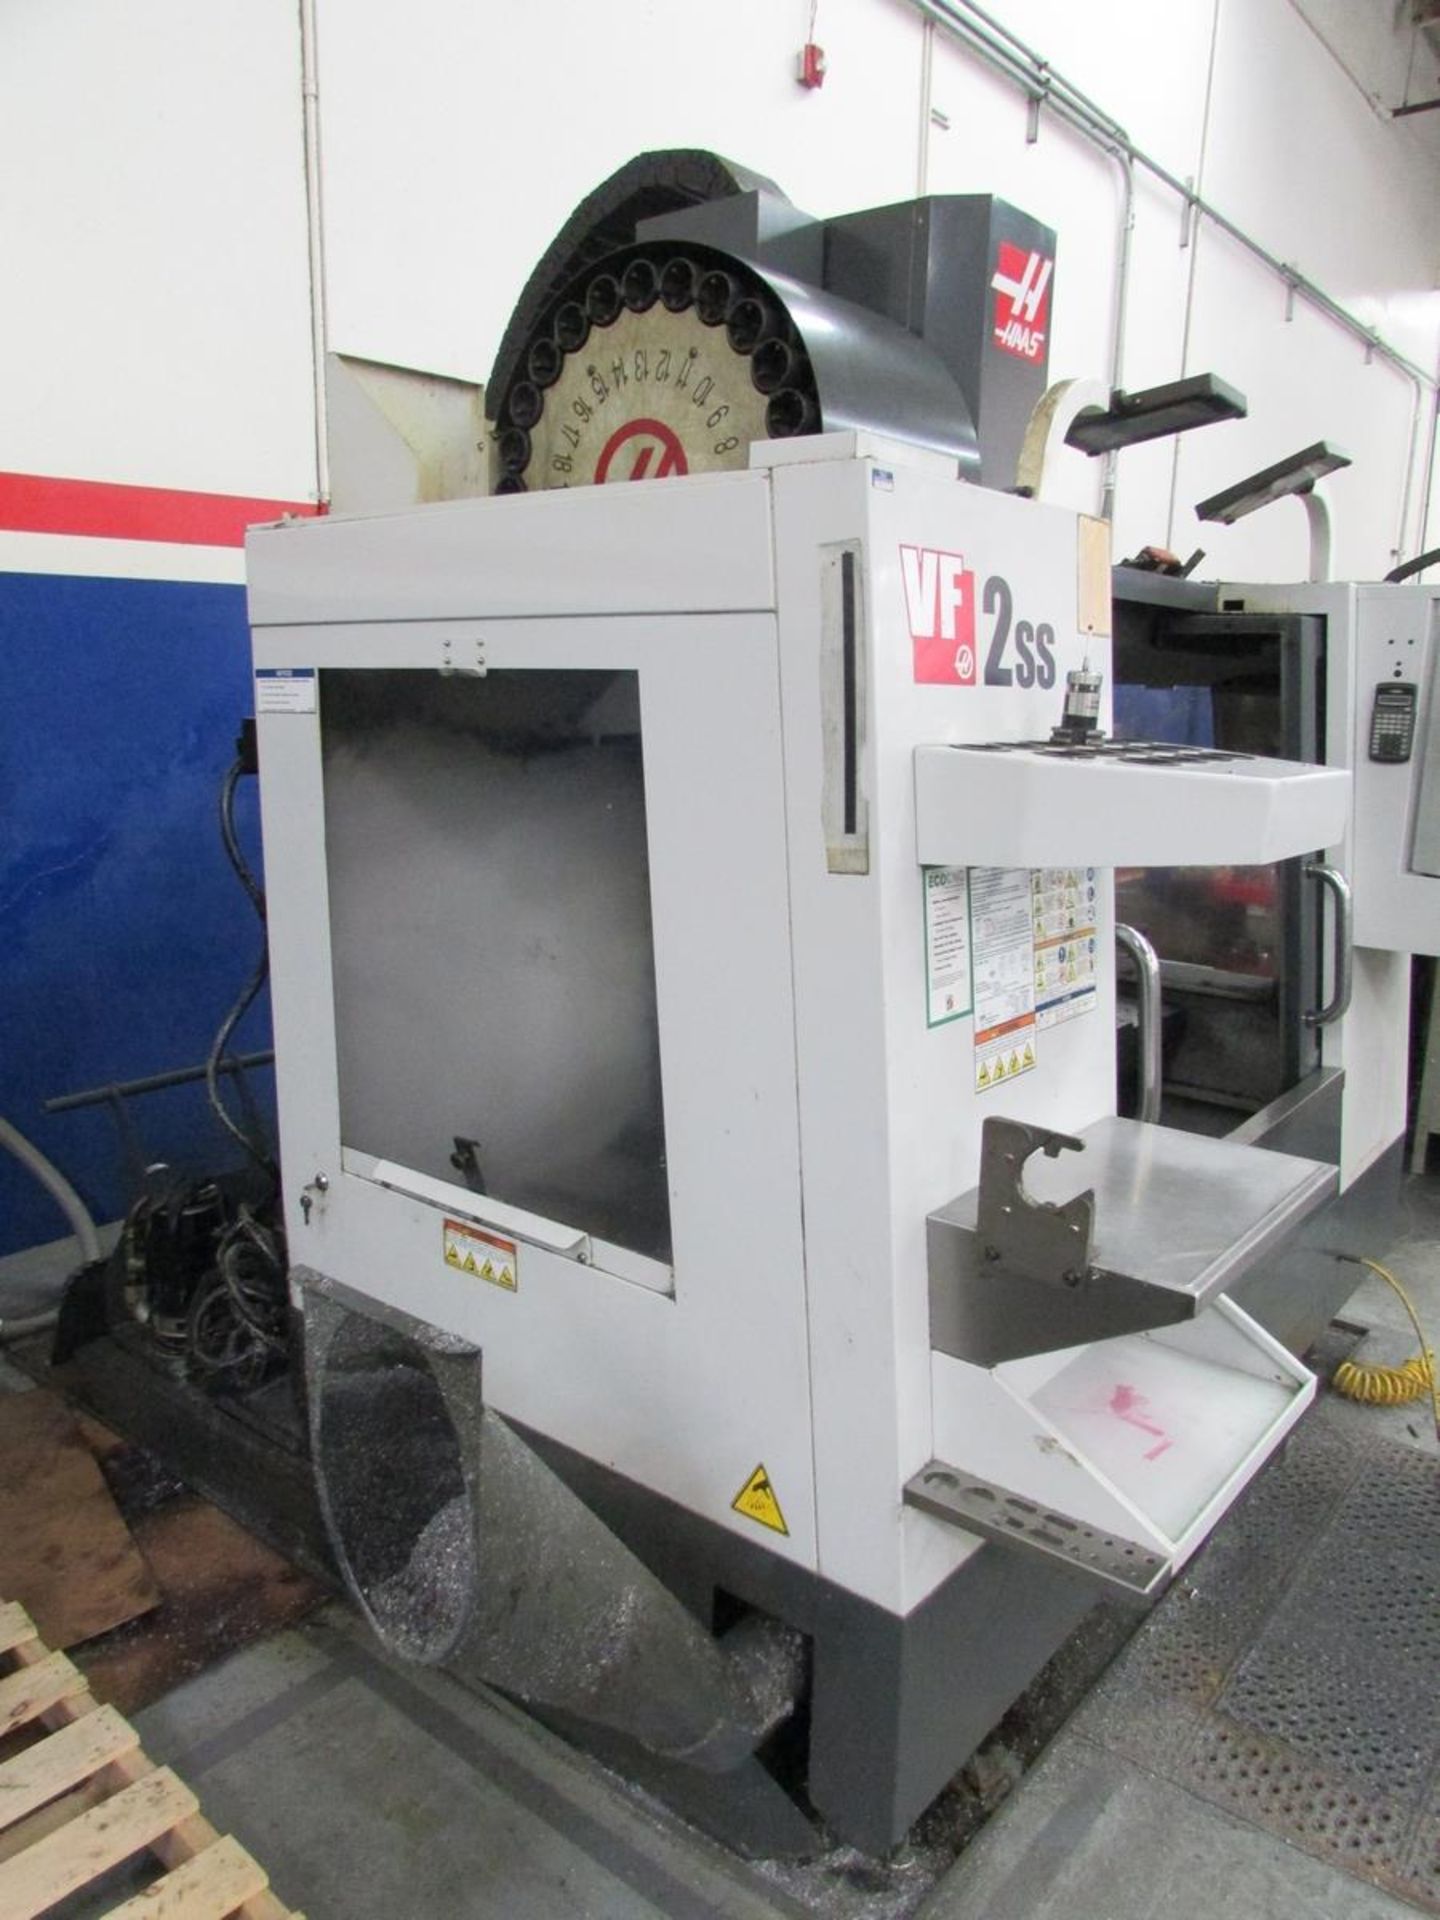 Haas VF2SS Vertical CNC Machining Center (2011) - Image 39 of 49